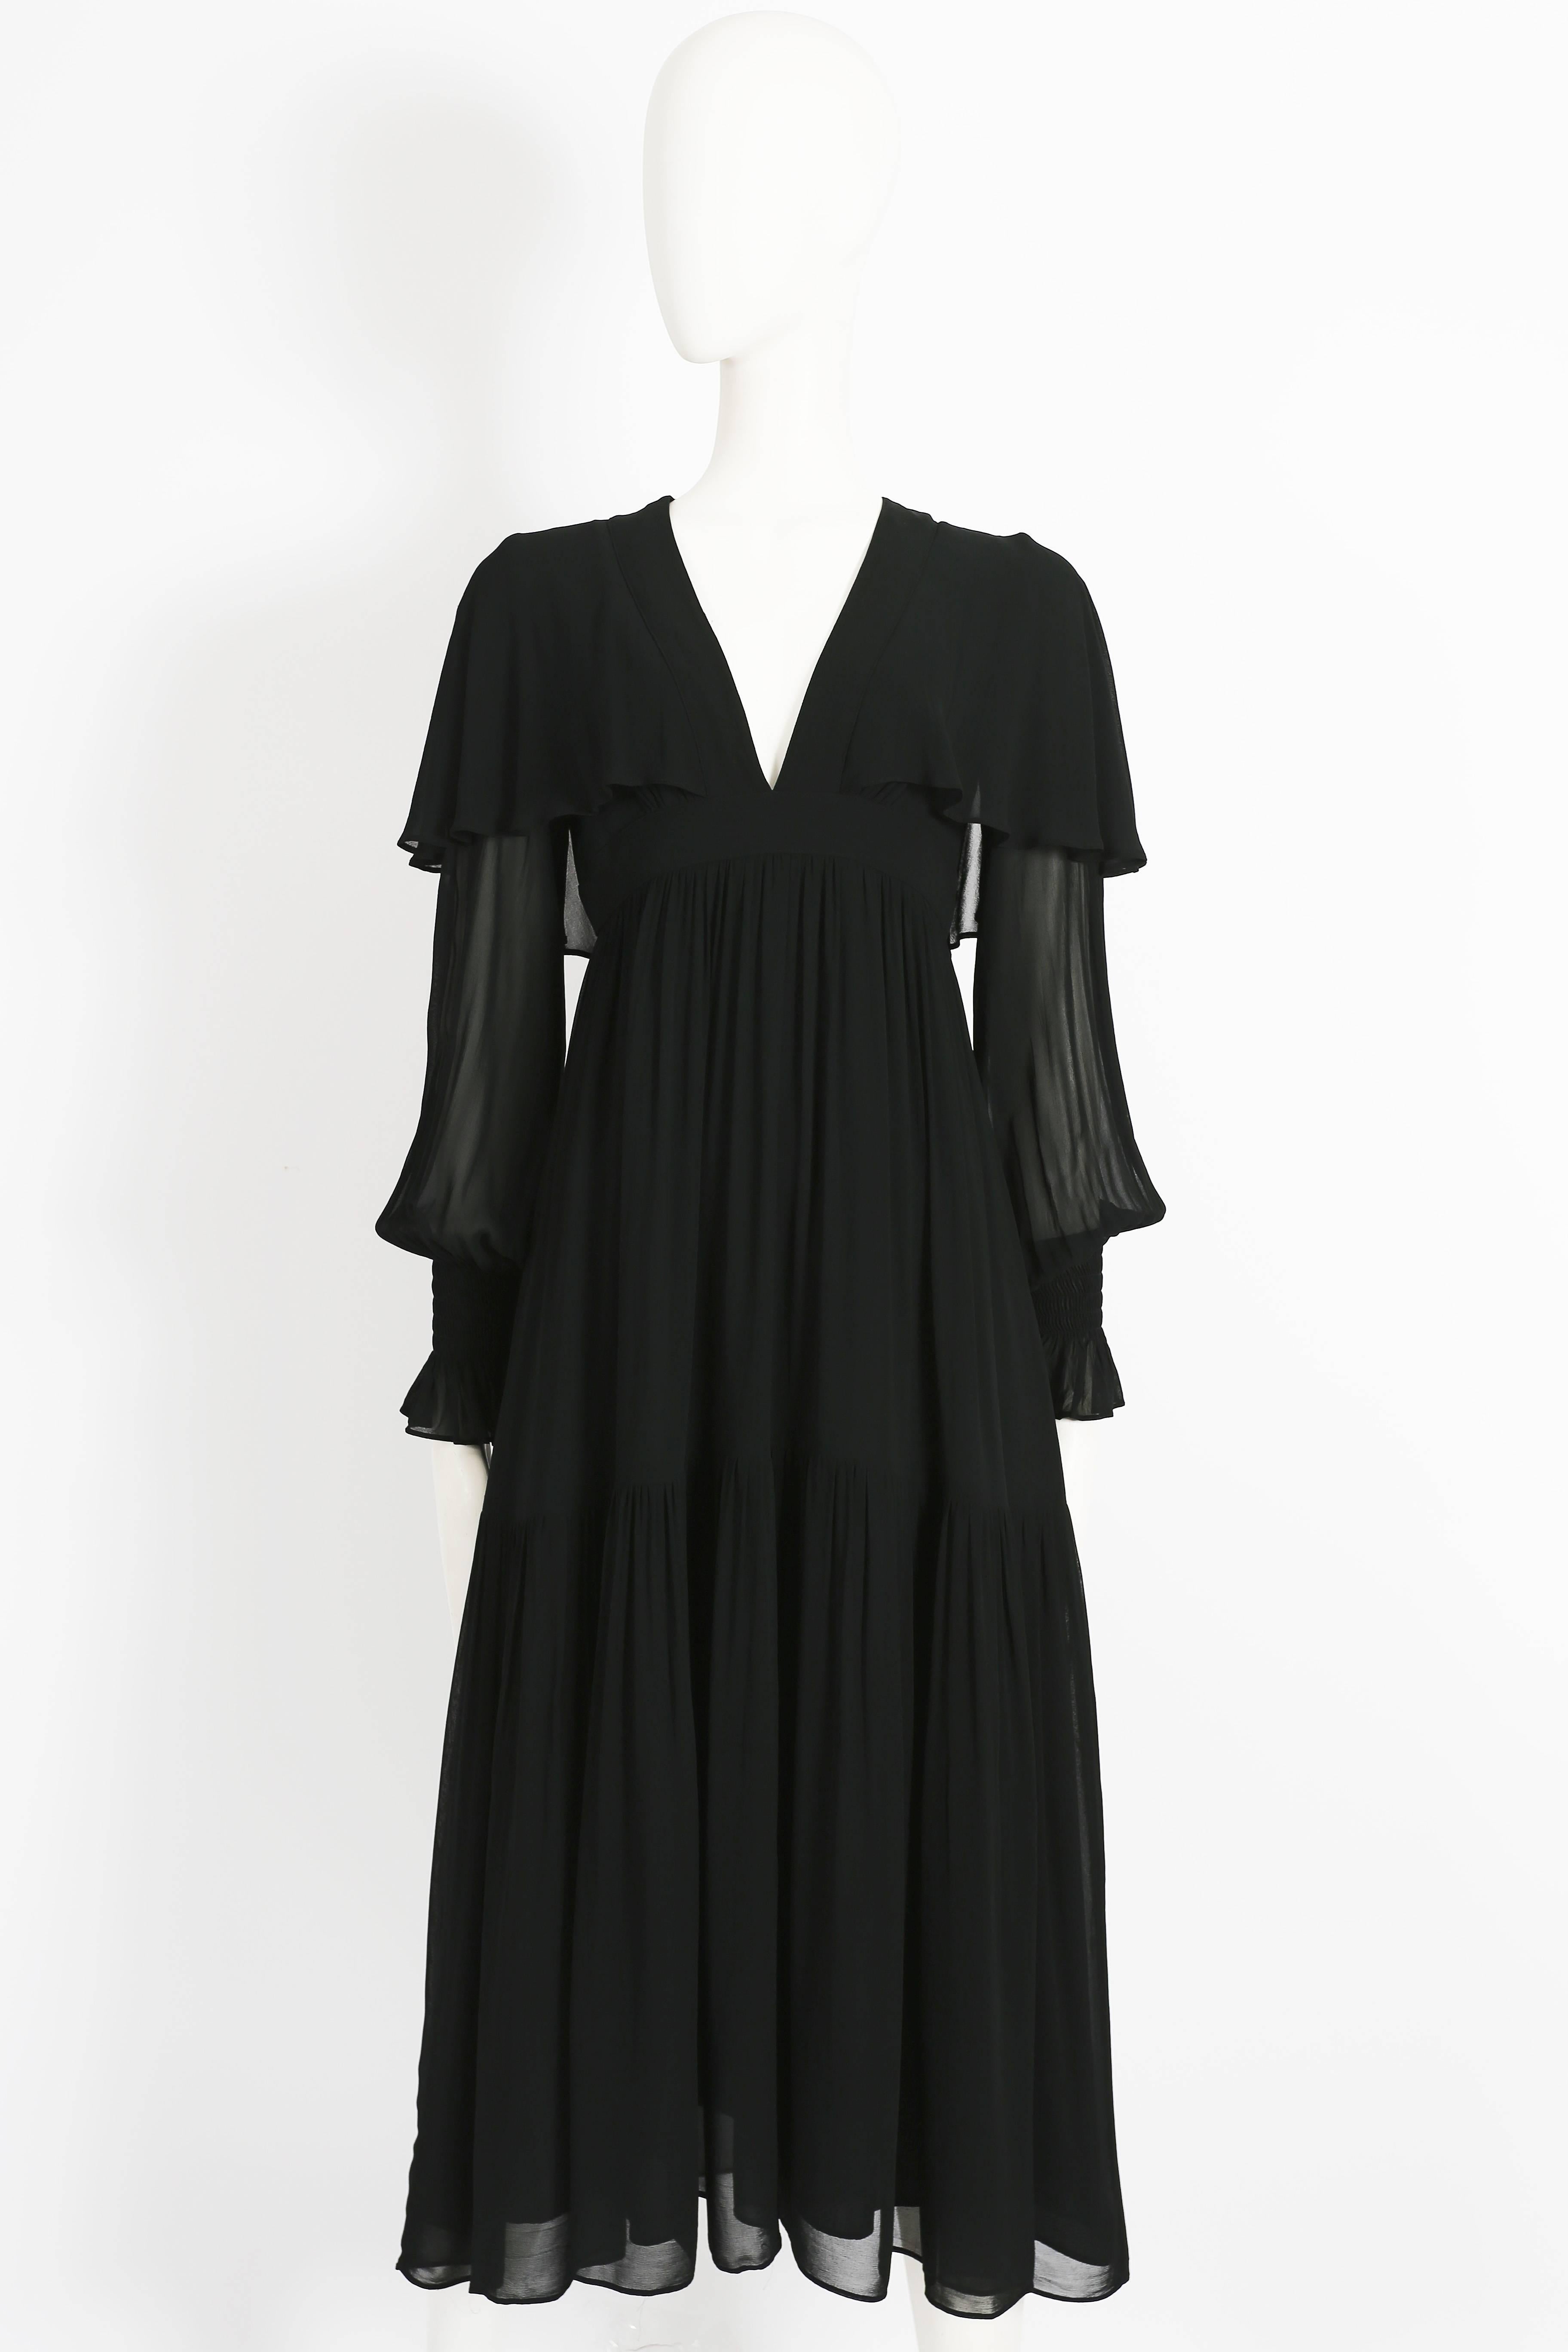 Ossie Clark black evening dress constructed in chiffon crepe with satin lining, circa 1972. The dress features attached capelet, pleated tiered design, shirred elasticated cuffs and zip fastening. 